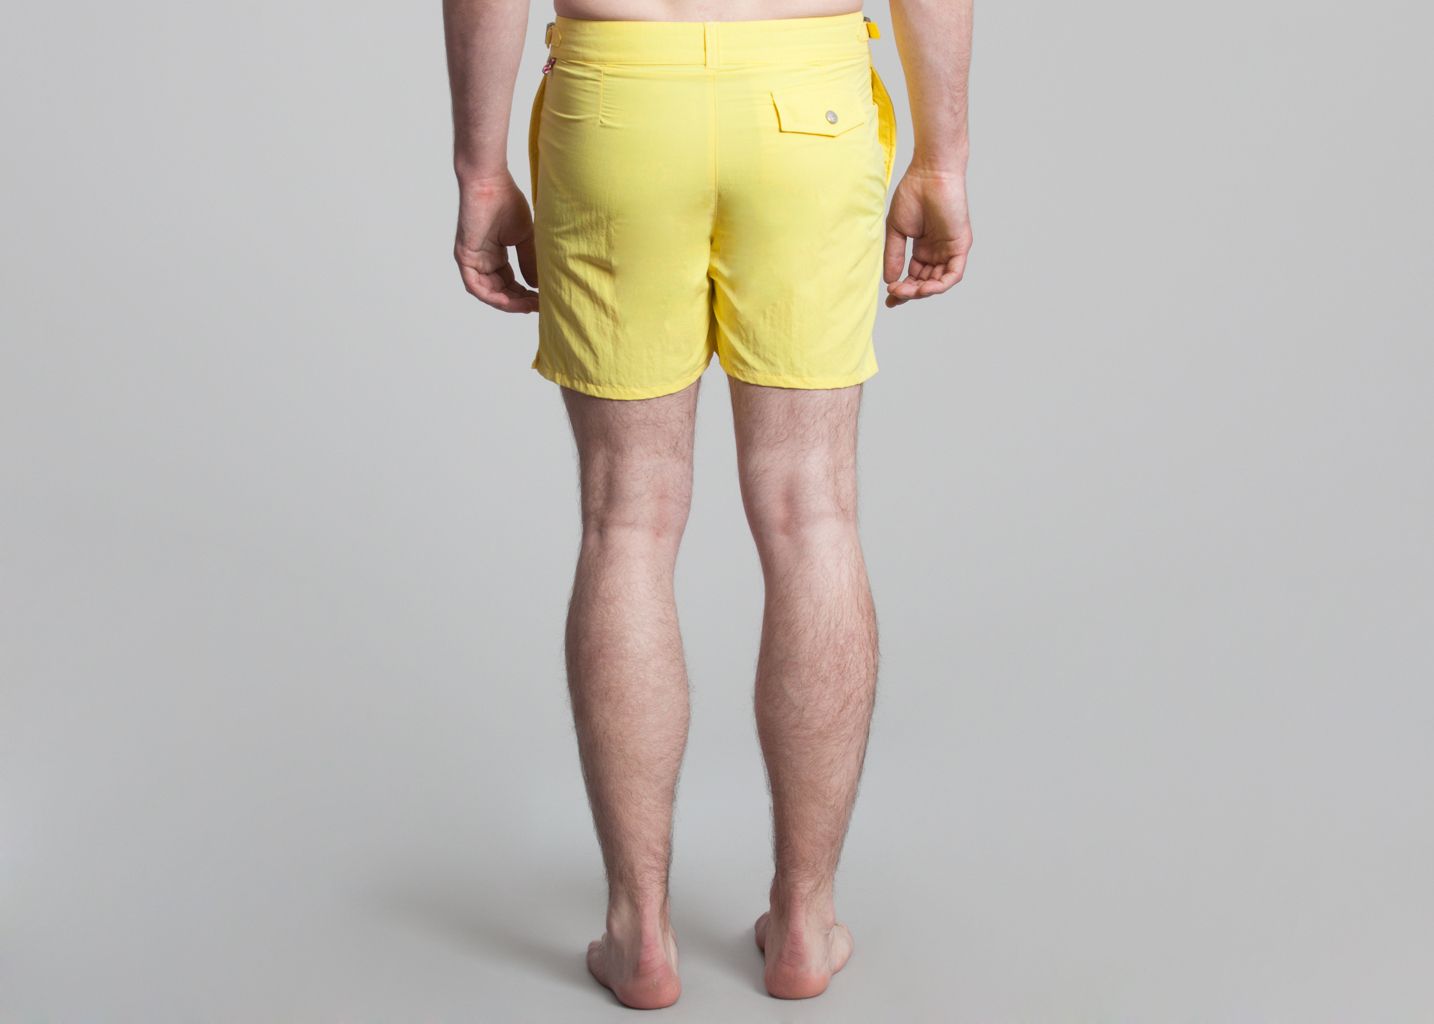 Solid Color Swimshorts - Swim-ology